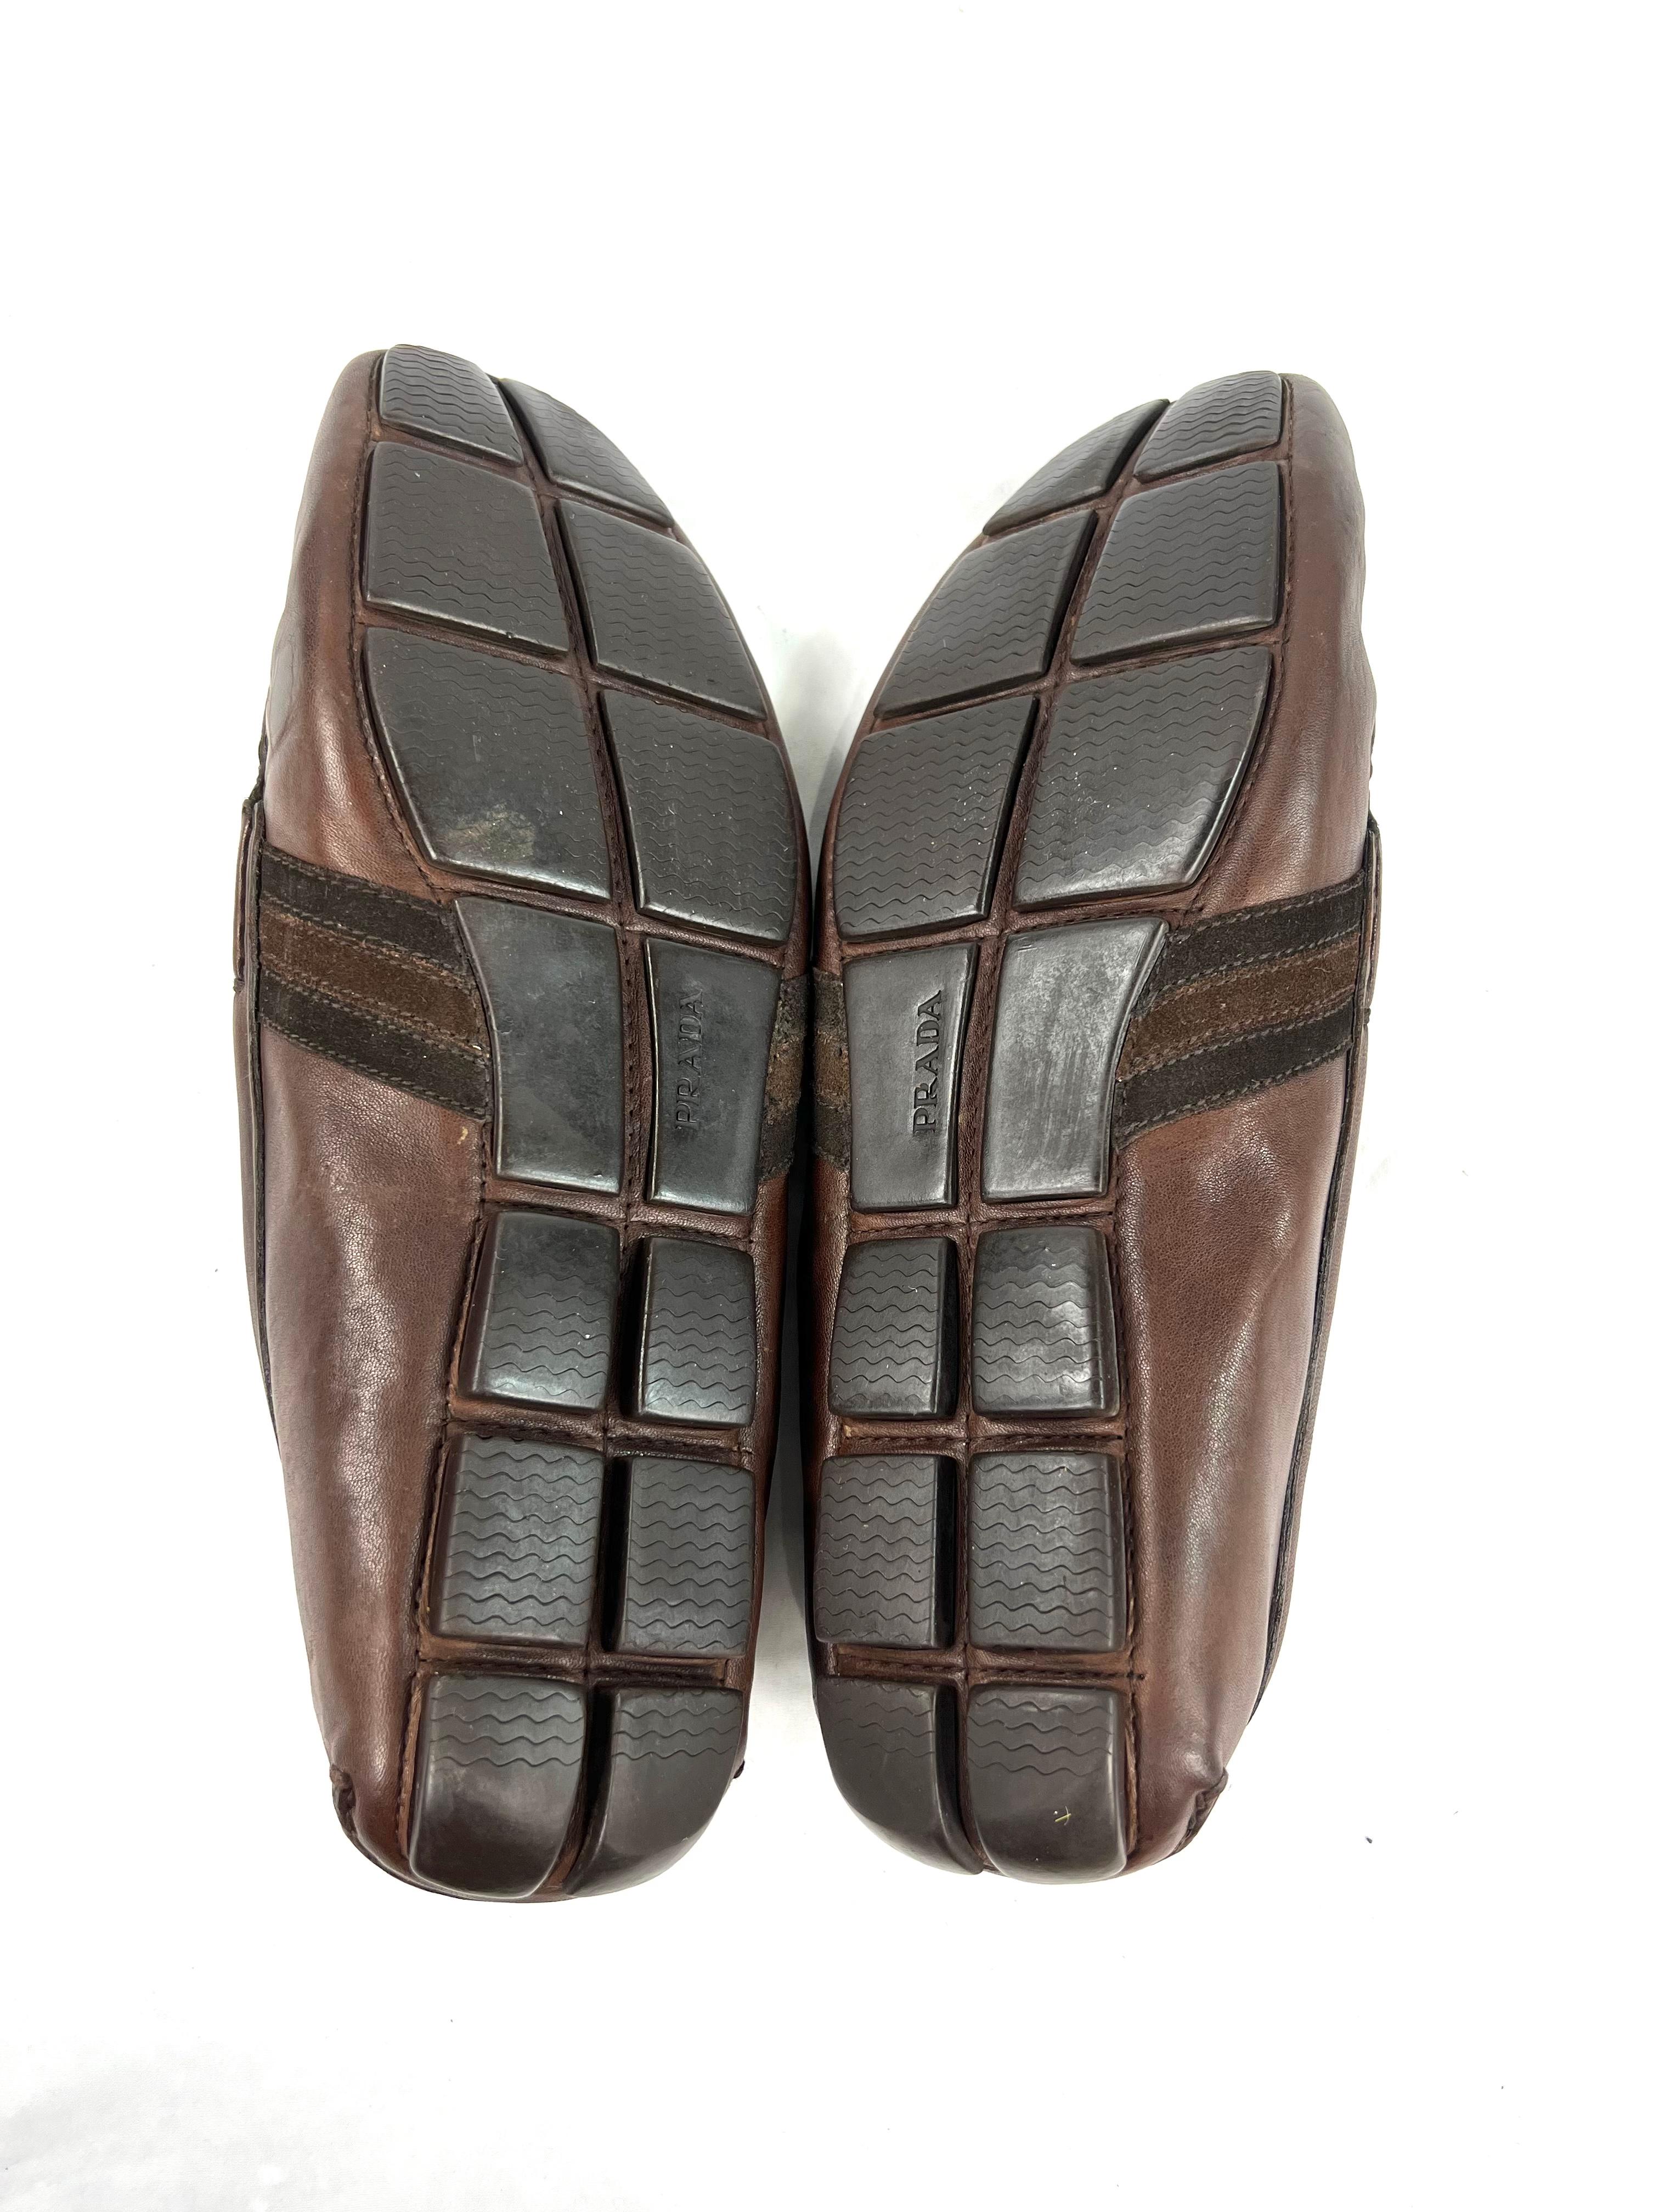 Prada Brown Leather Moccasins Flat Shoes, Size 11 For Sale 2